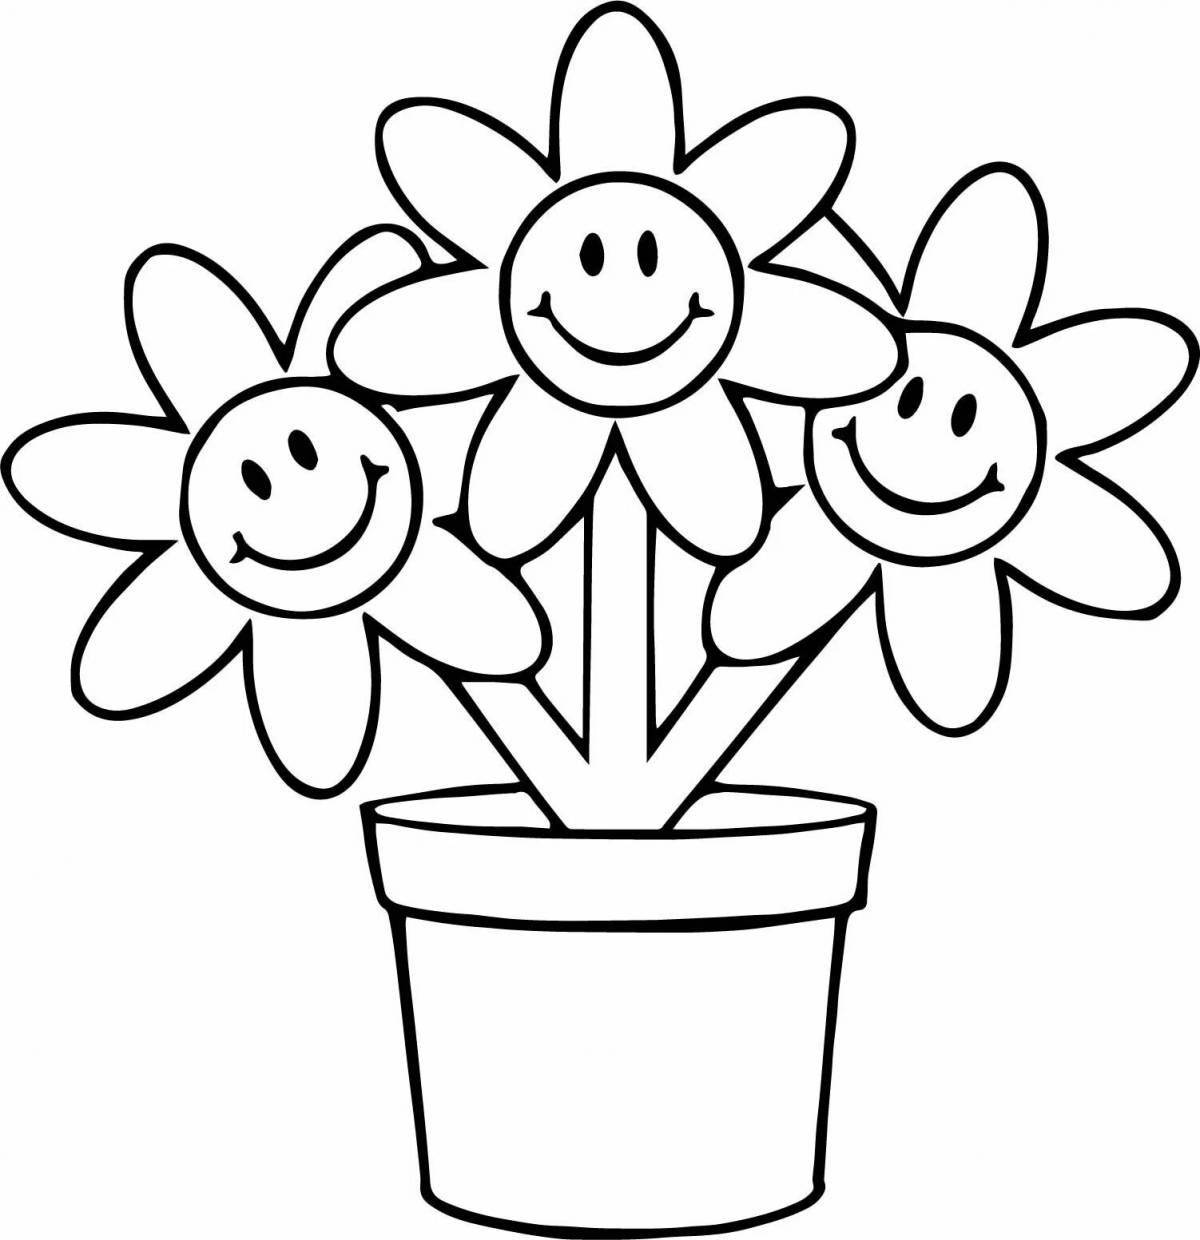 Great coloring flowers for kids